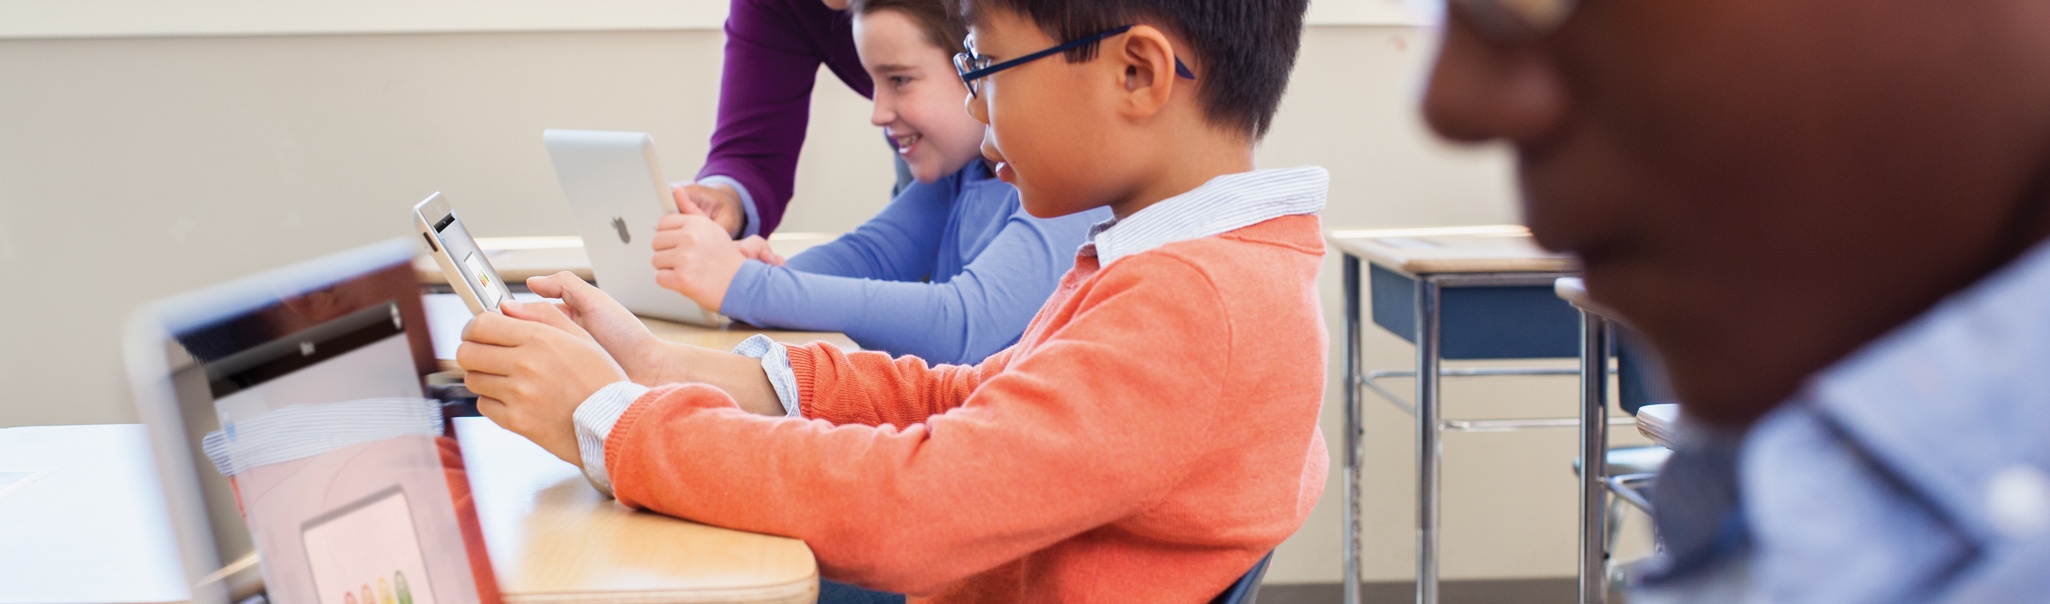 Mobile Devices in the Classroom